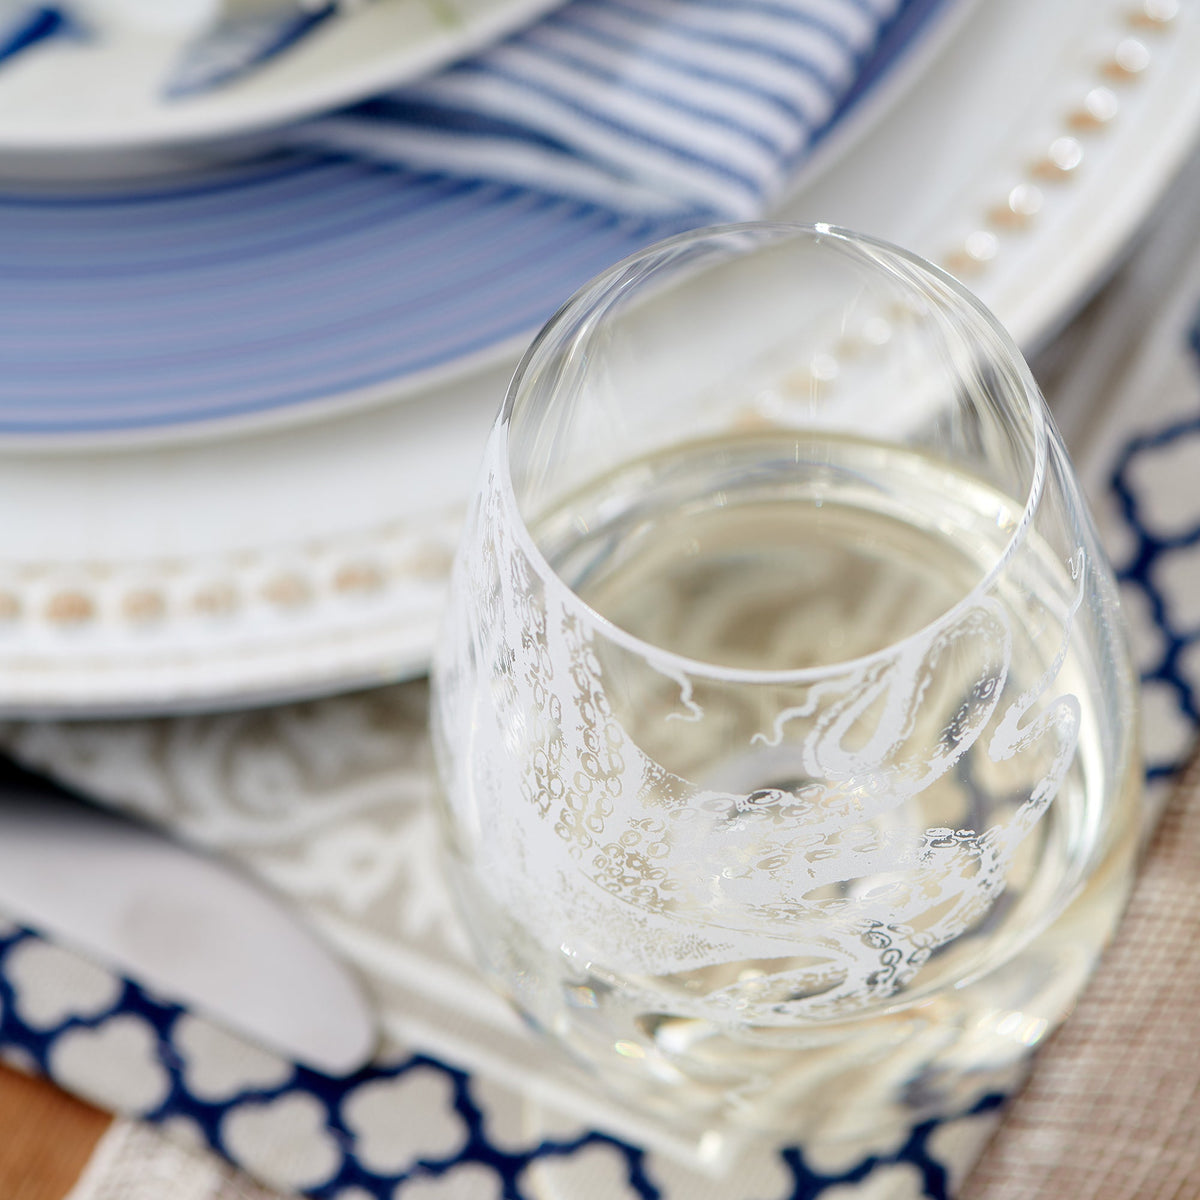 A Lucy Stemless Wine Glass from Caskata Artisanal Home sits elegantly on a table setting.